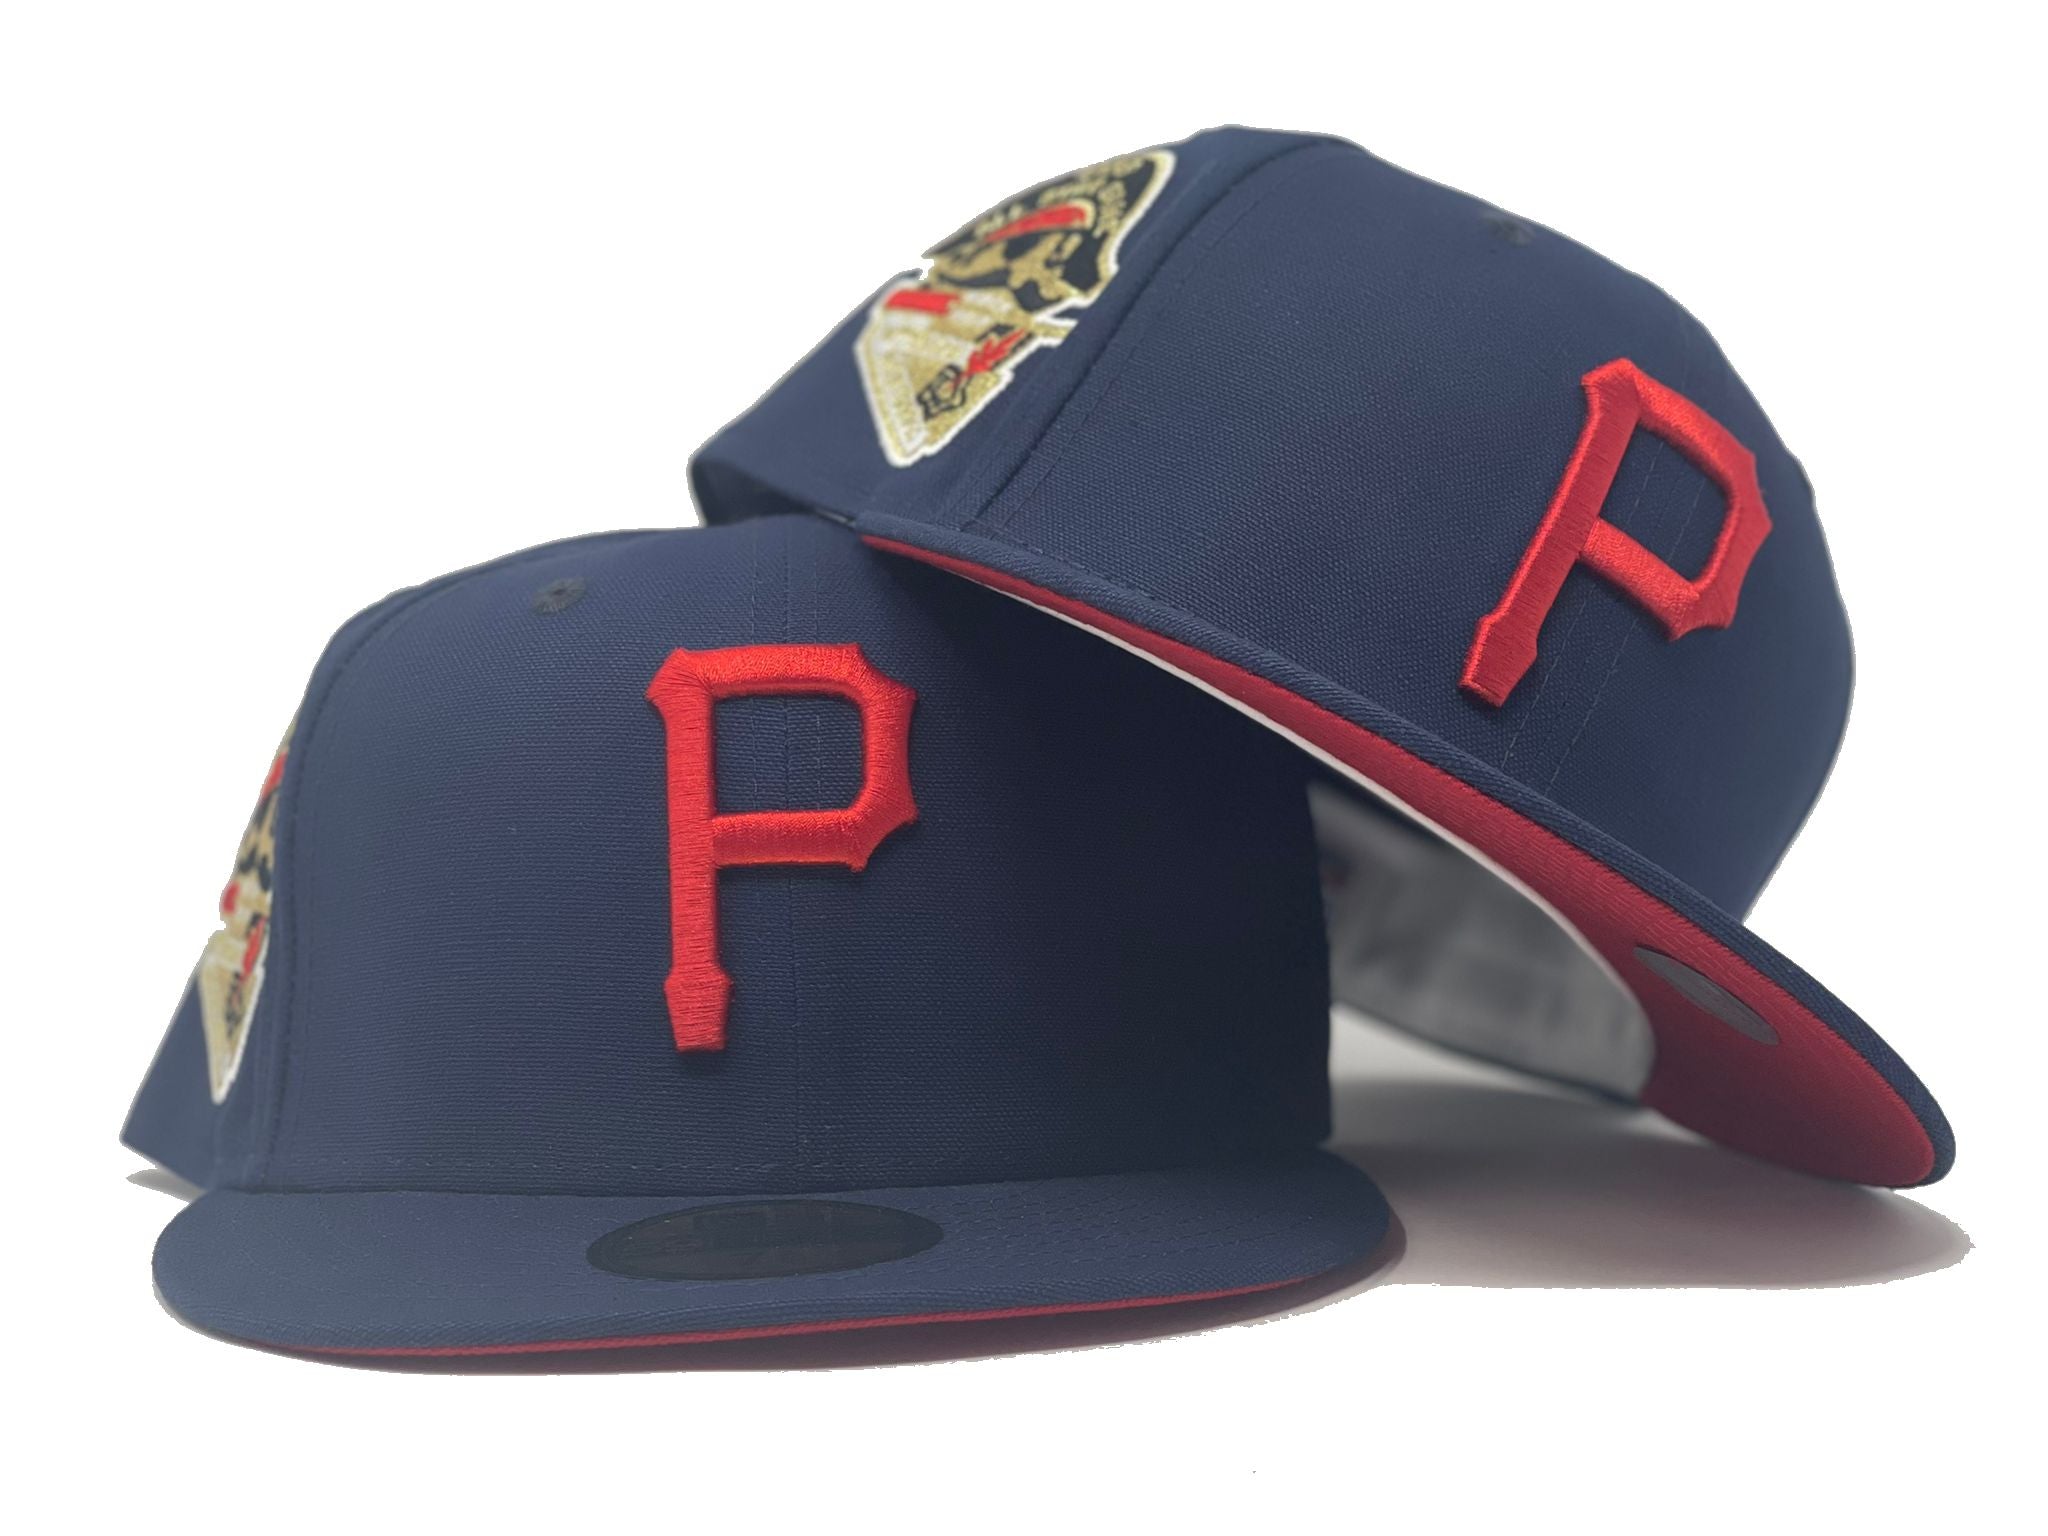 Pittsburgh Pirates - 2018 Players' Weekend Team Umpire 59FIFTY MLB